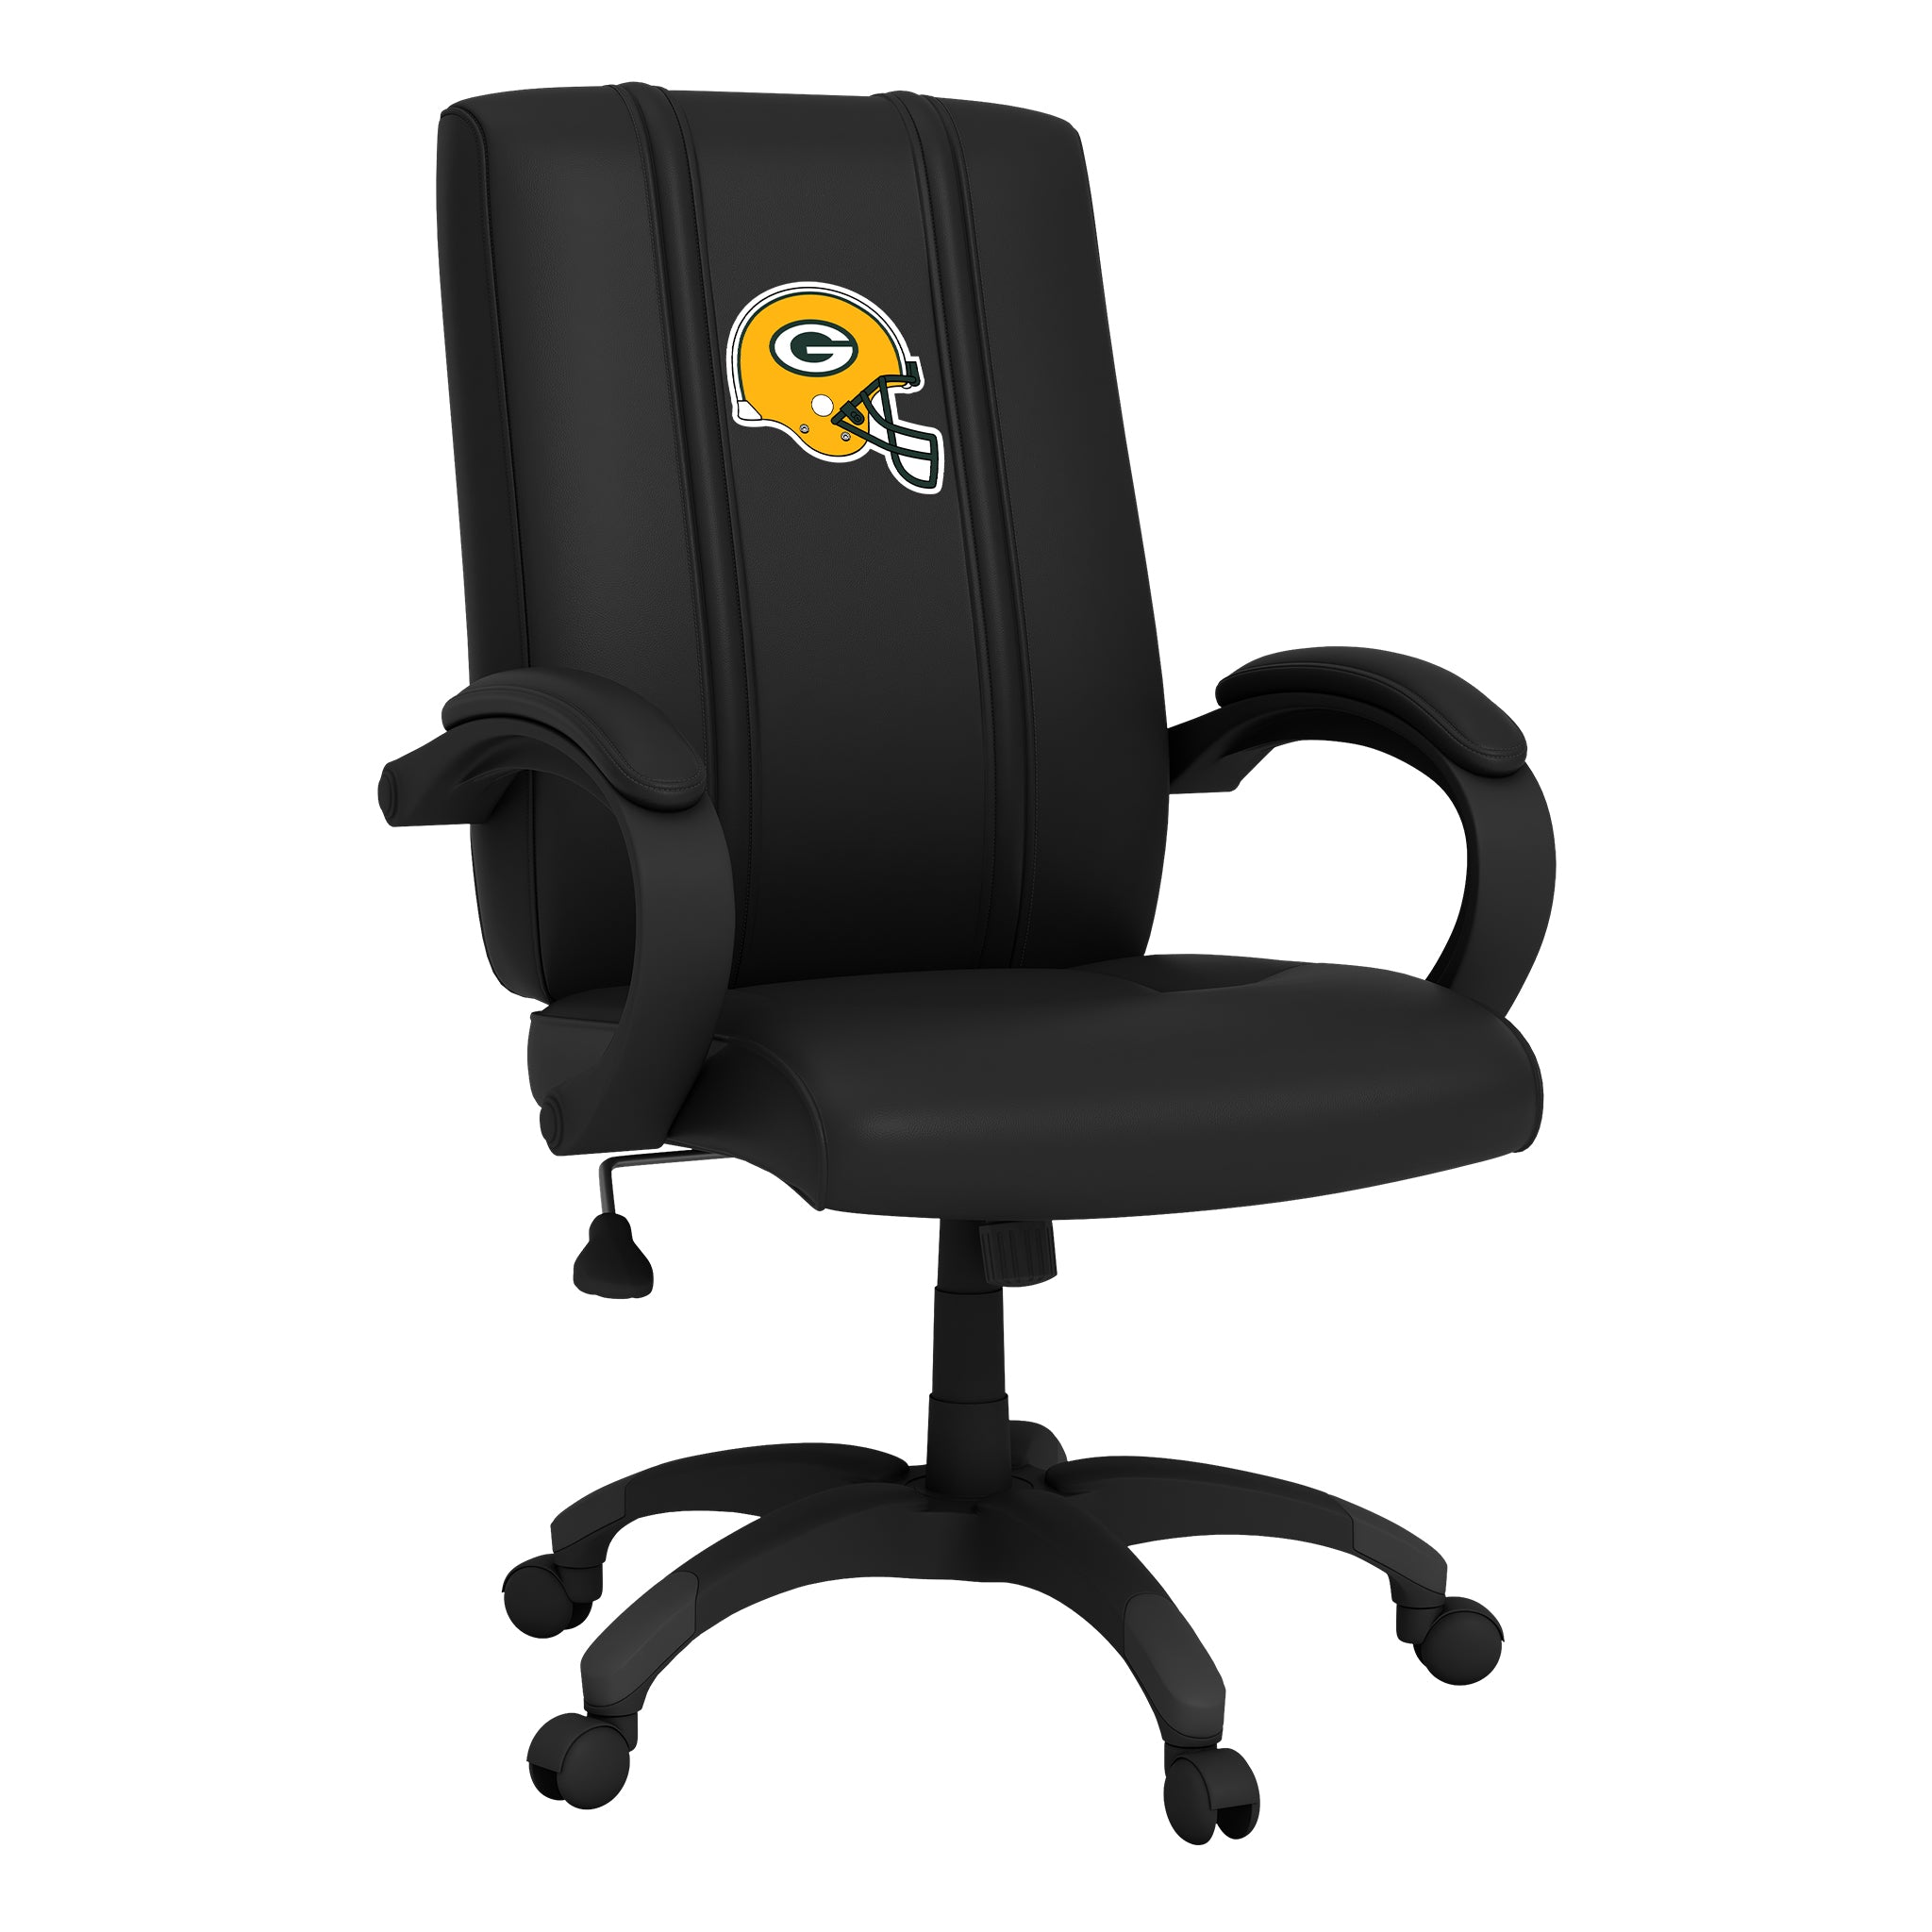 Green Bay Packers Office Chair 1000